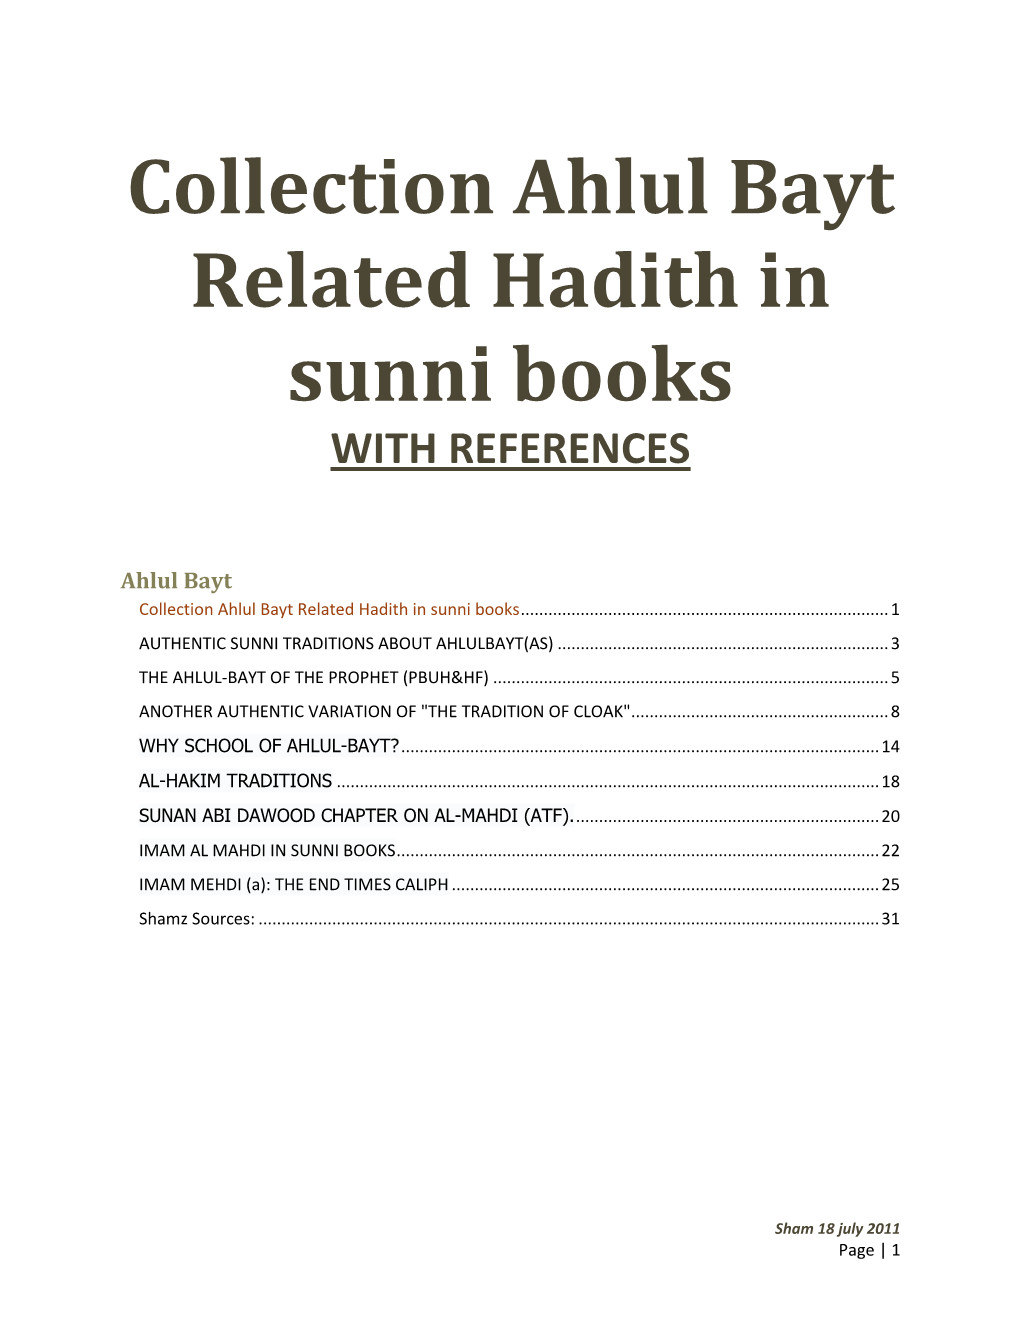 Collection Ahlul Bayt Related Hadith in Sunni Books with REFERENCES